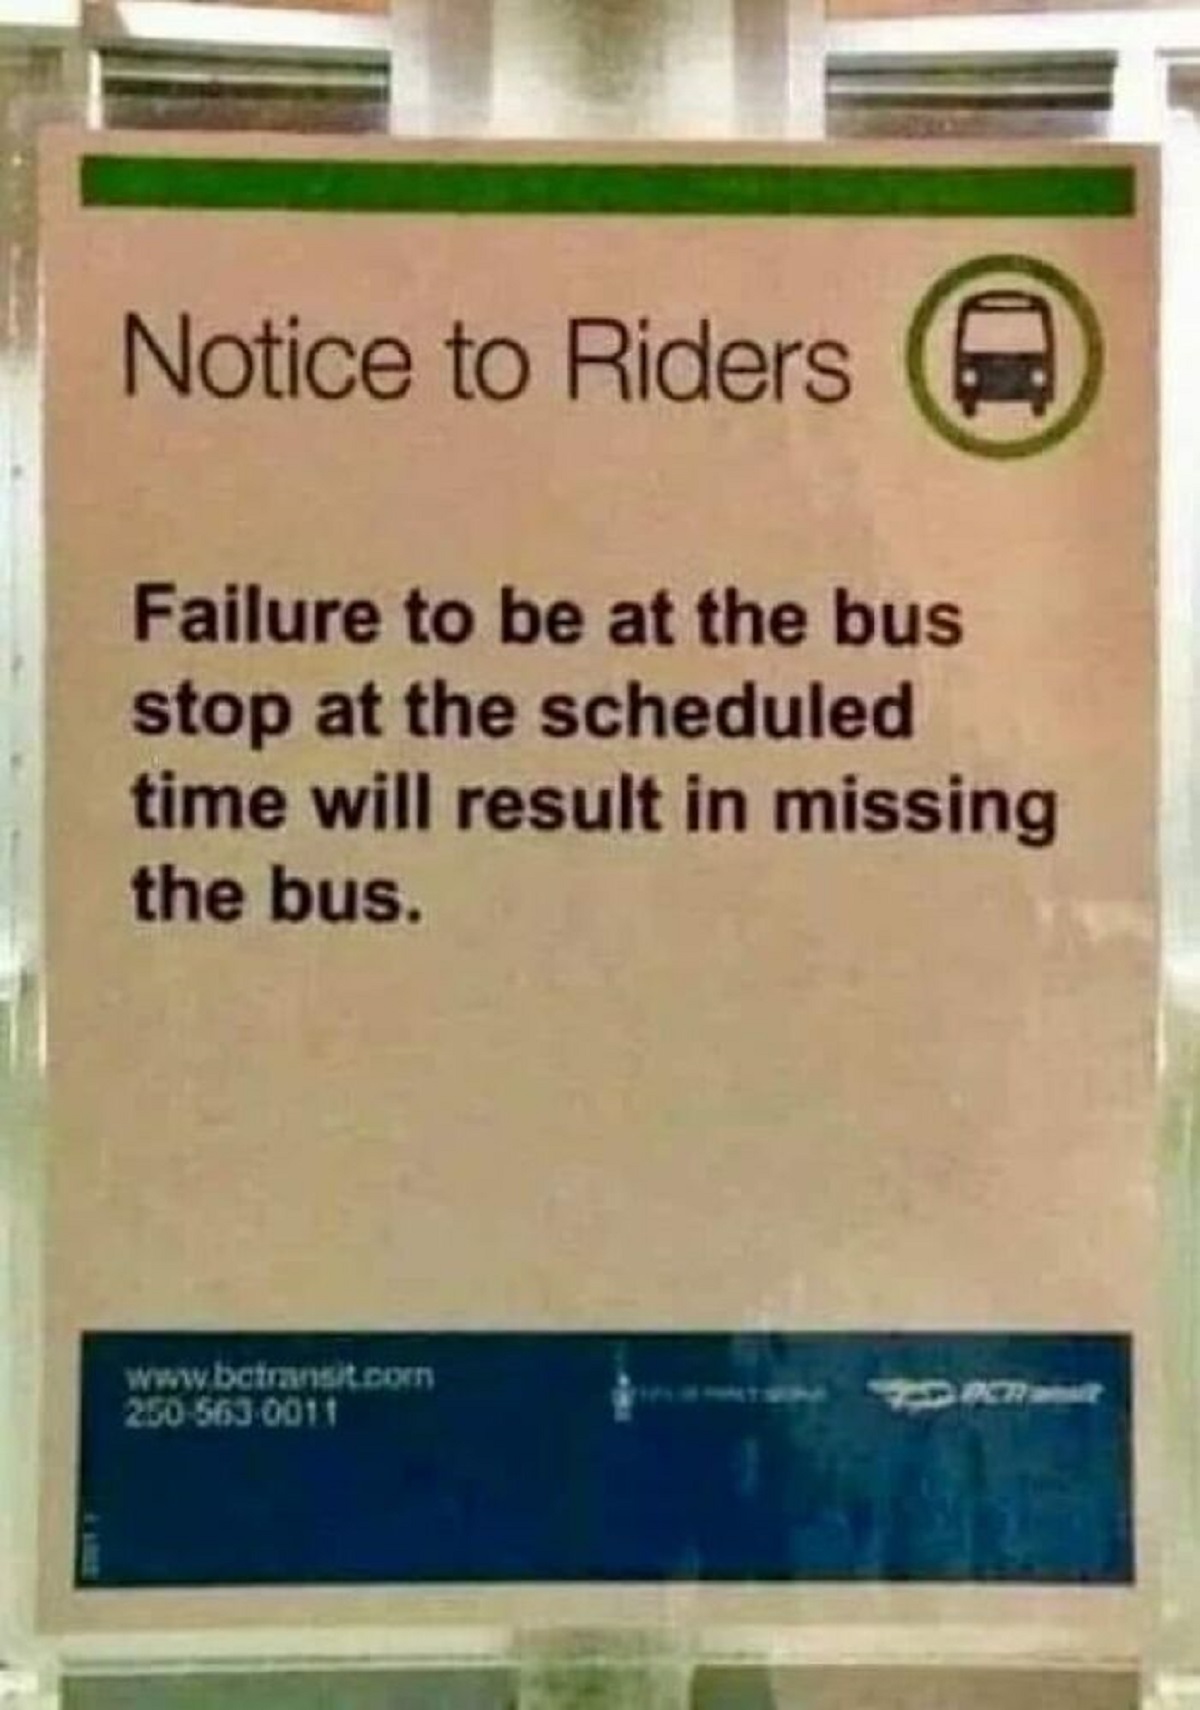 signage - Dd Notice to Riders E Failure to be at the bus stop at the scheduled time will result in missing the bus. 2505630011